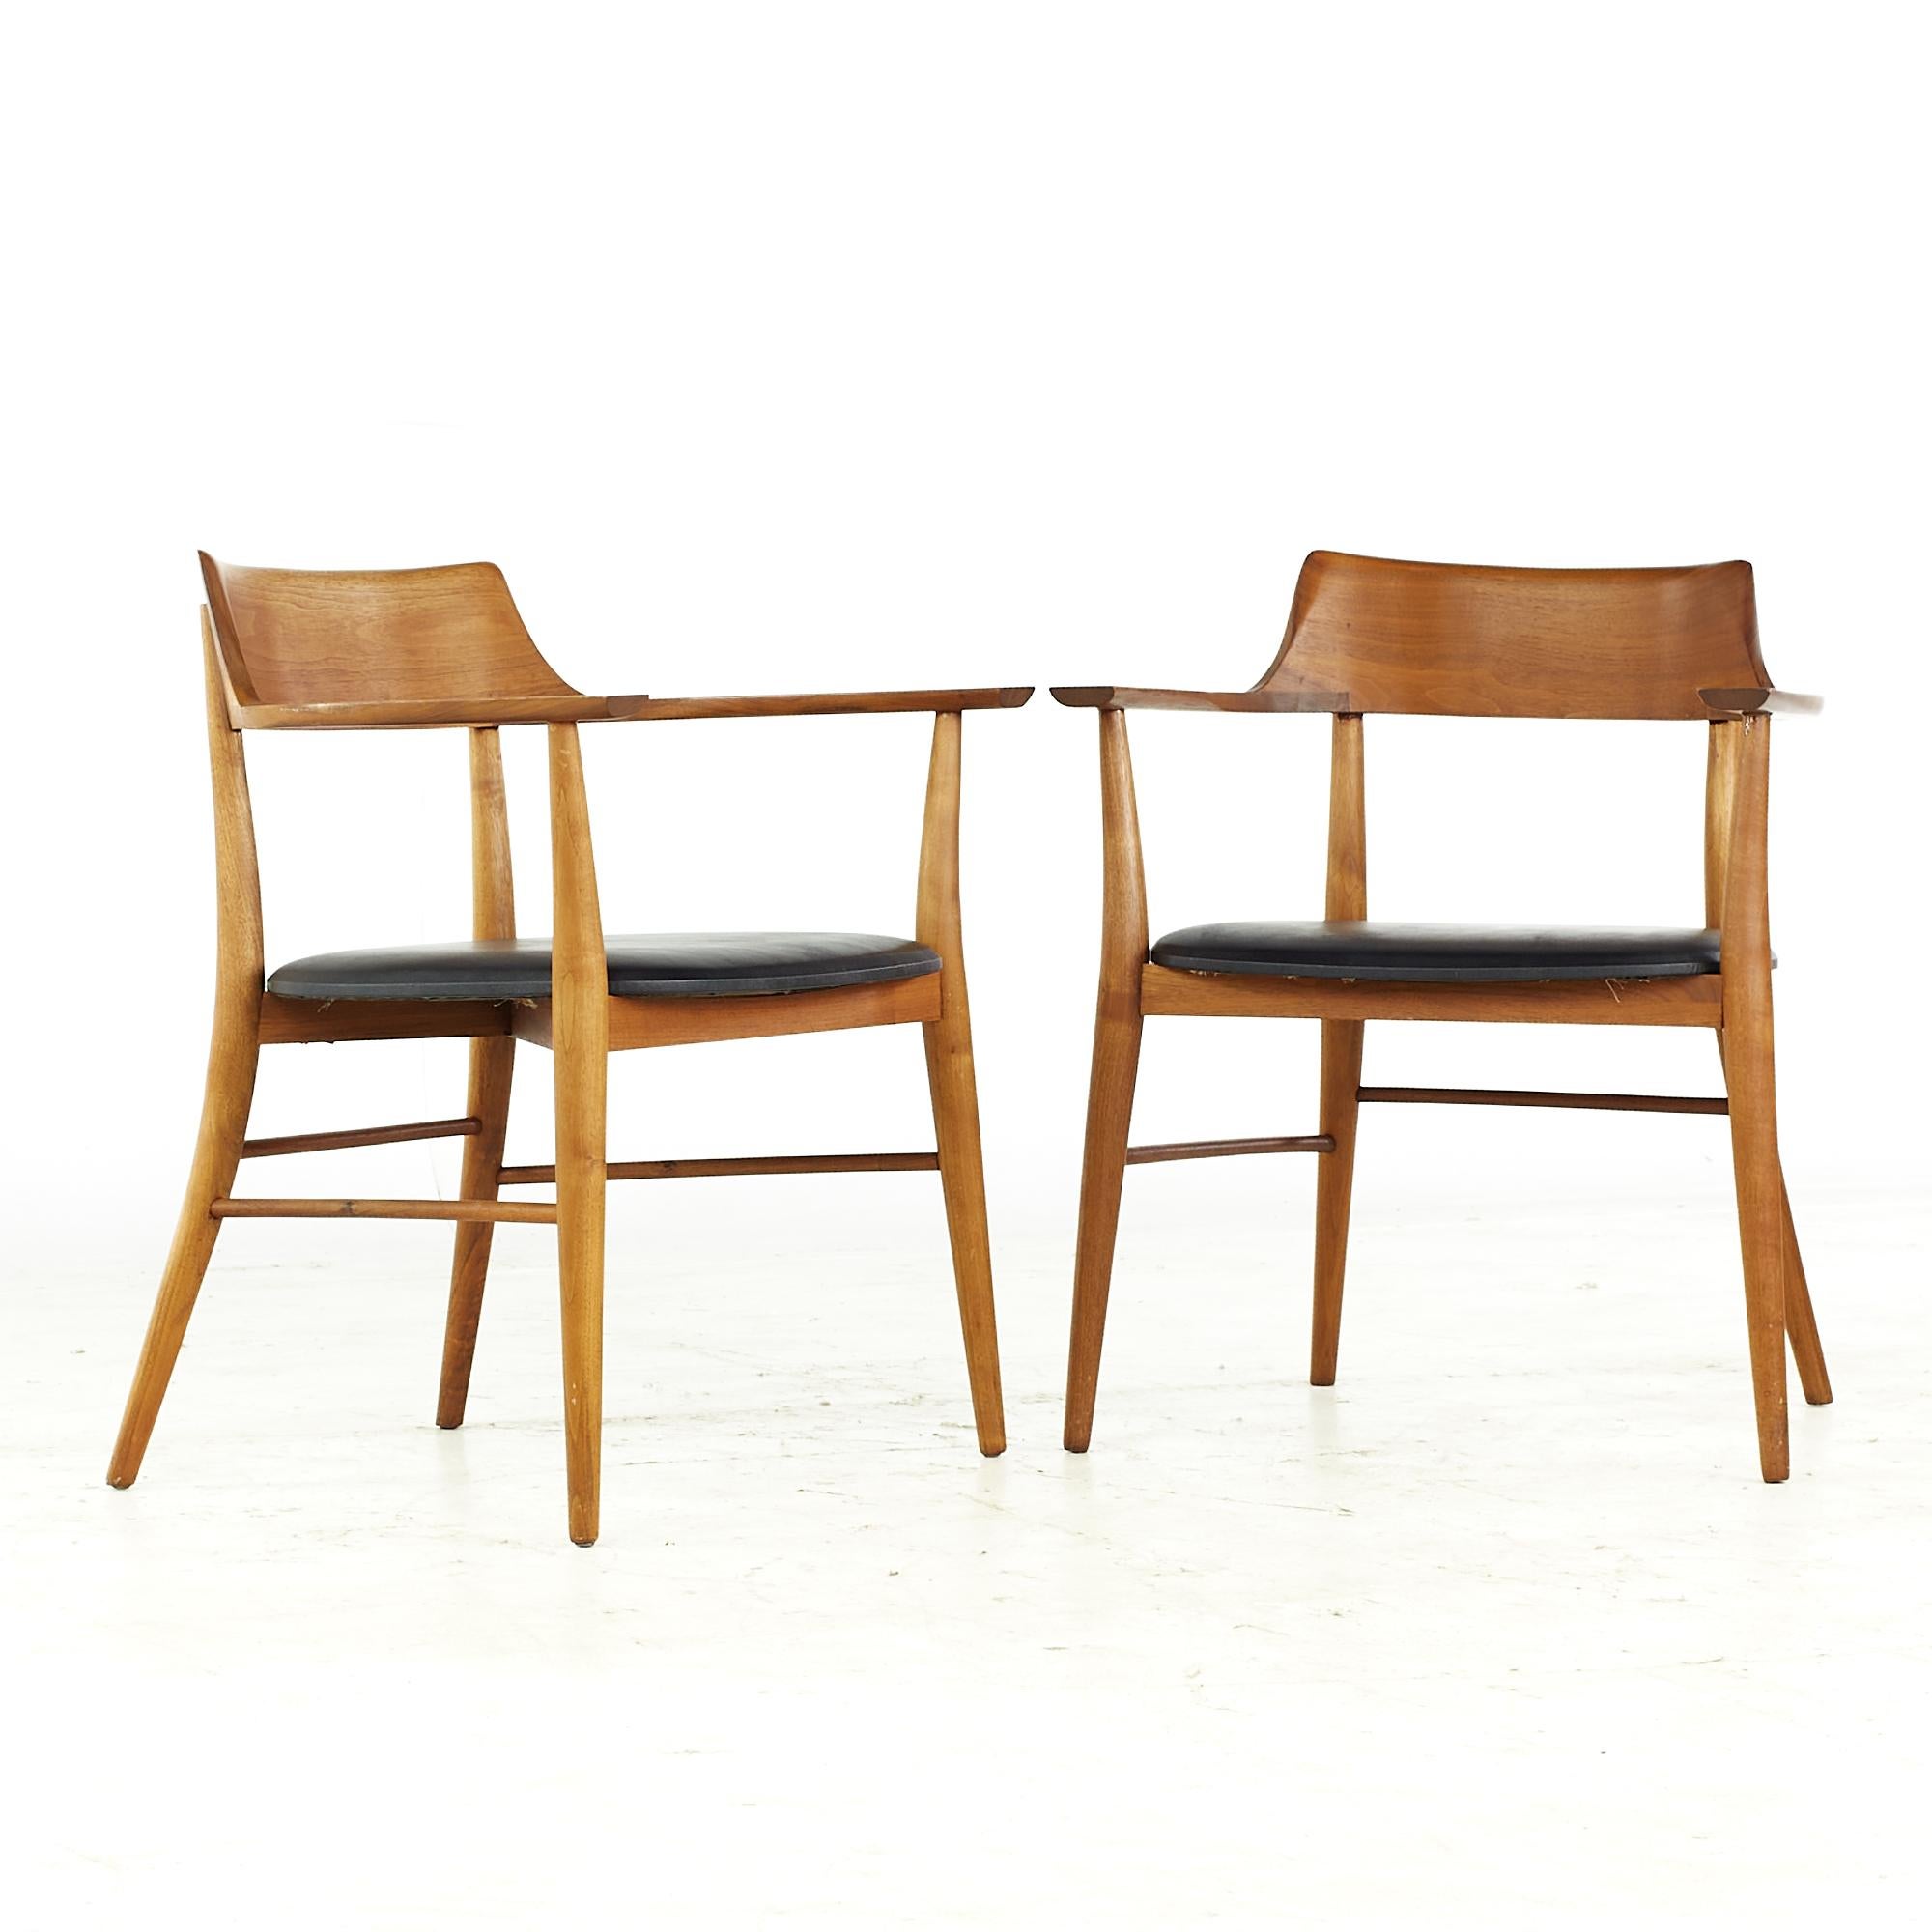 Paul McCobb for Directional midcentury occasional lounge chairs - pair.

Each chair measures: 24.75 wide x 21 deep x 29.5 inches high, with a seat height of 17 and arm height/chair clearance of 25.75 inches.

All pieces of furniture can be had